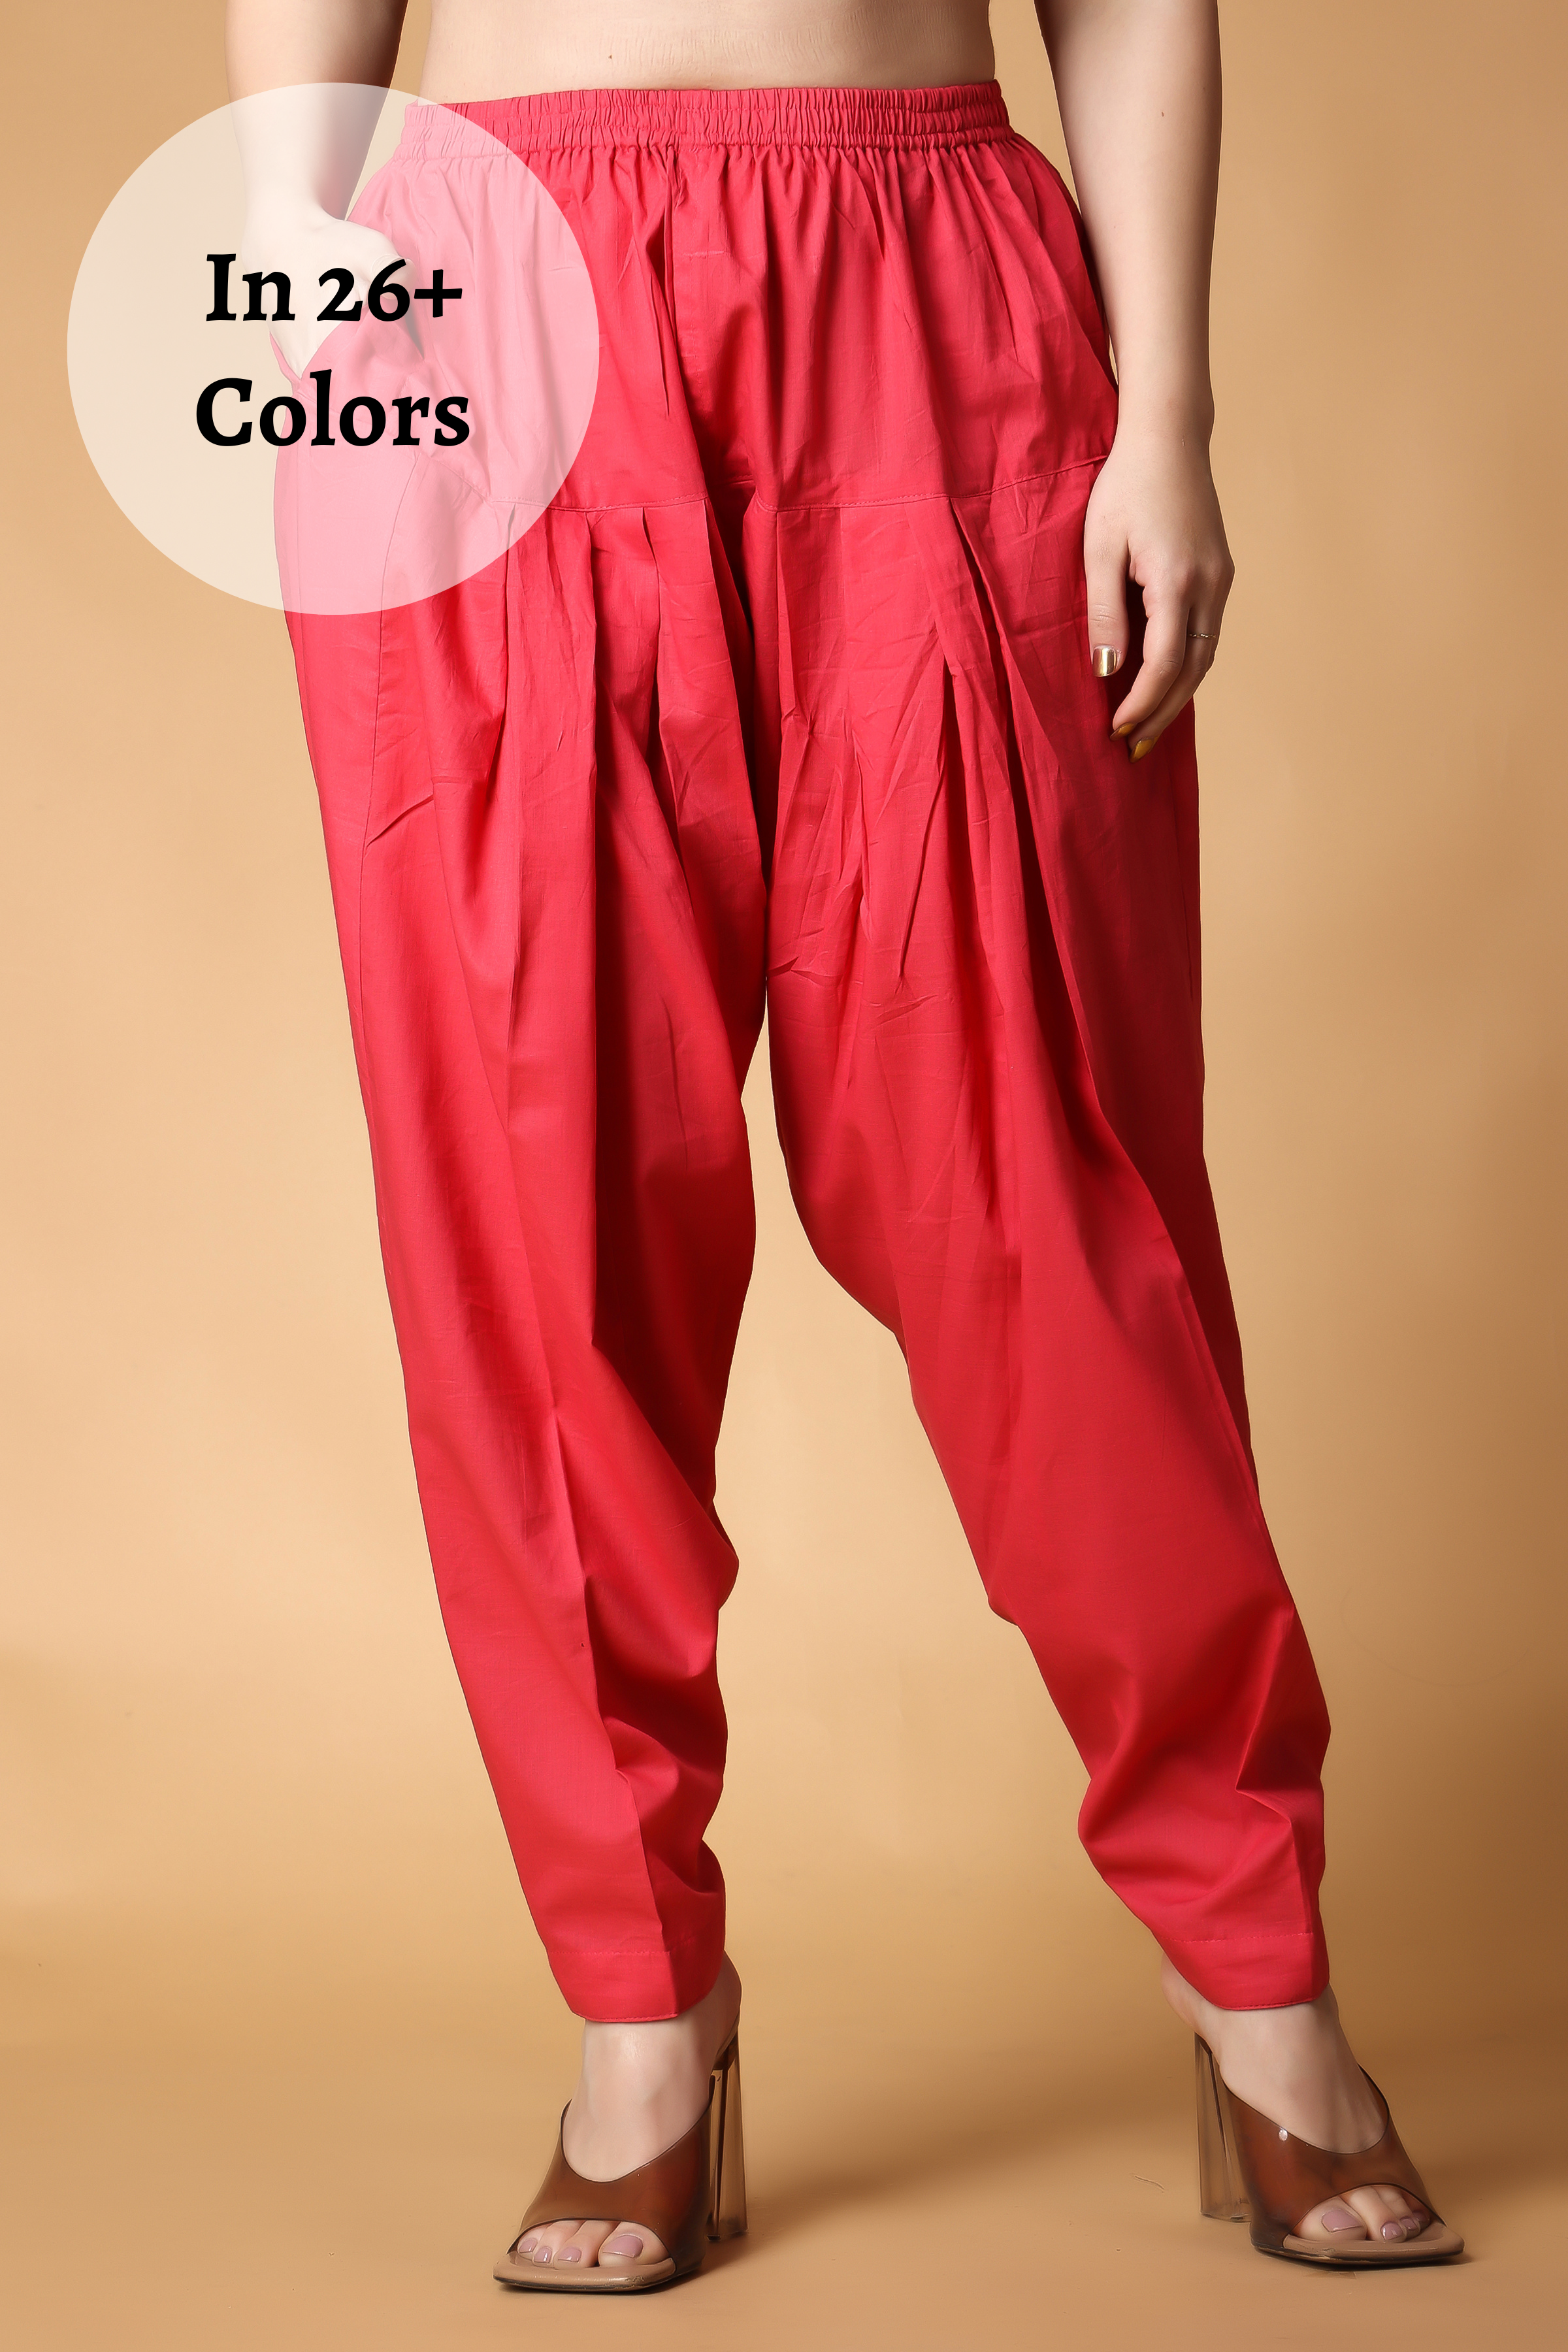 How to sew different Salwar Pants (Easy sewing instructions) - Sew Guide